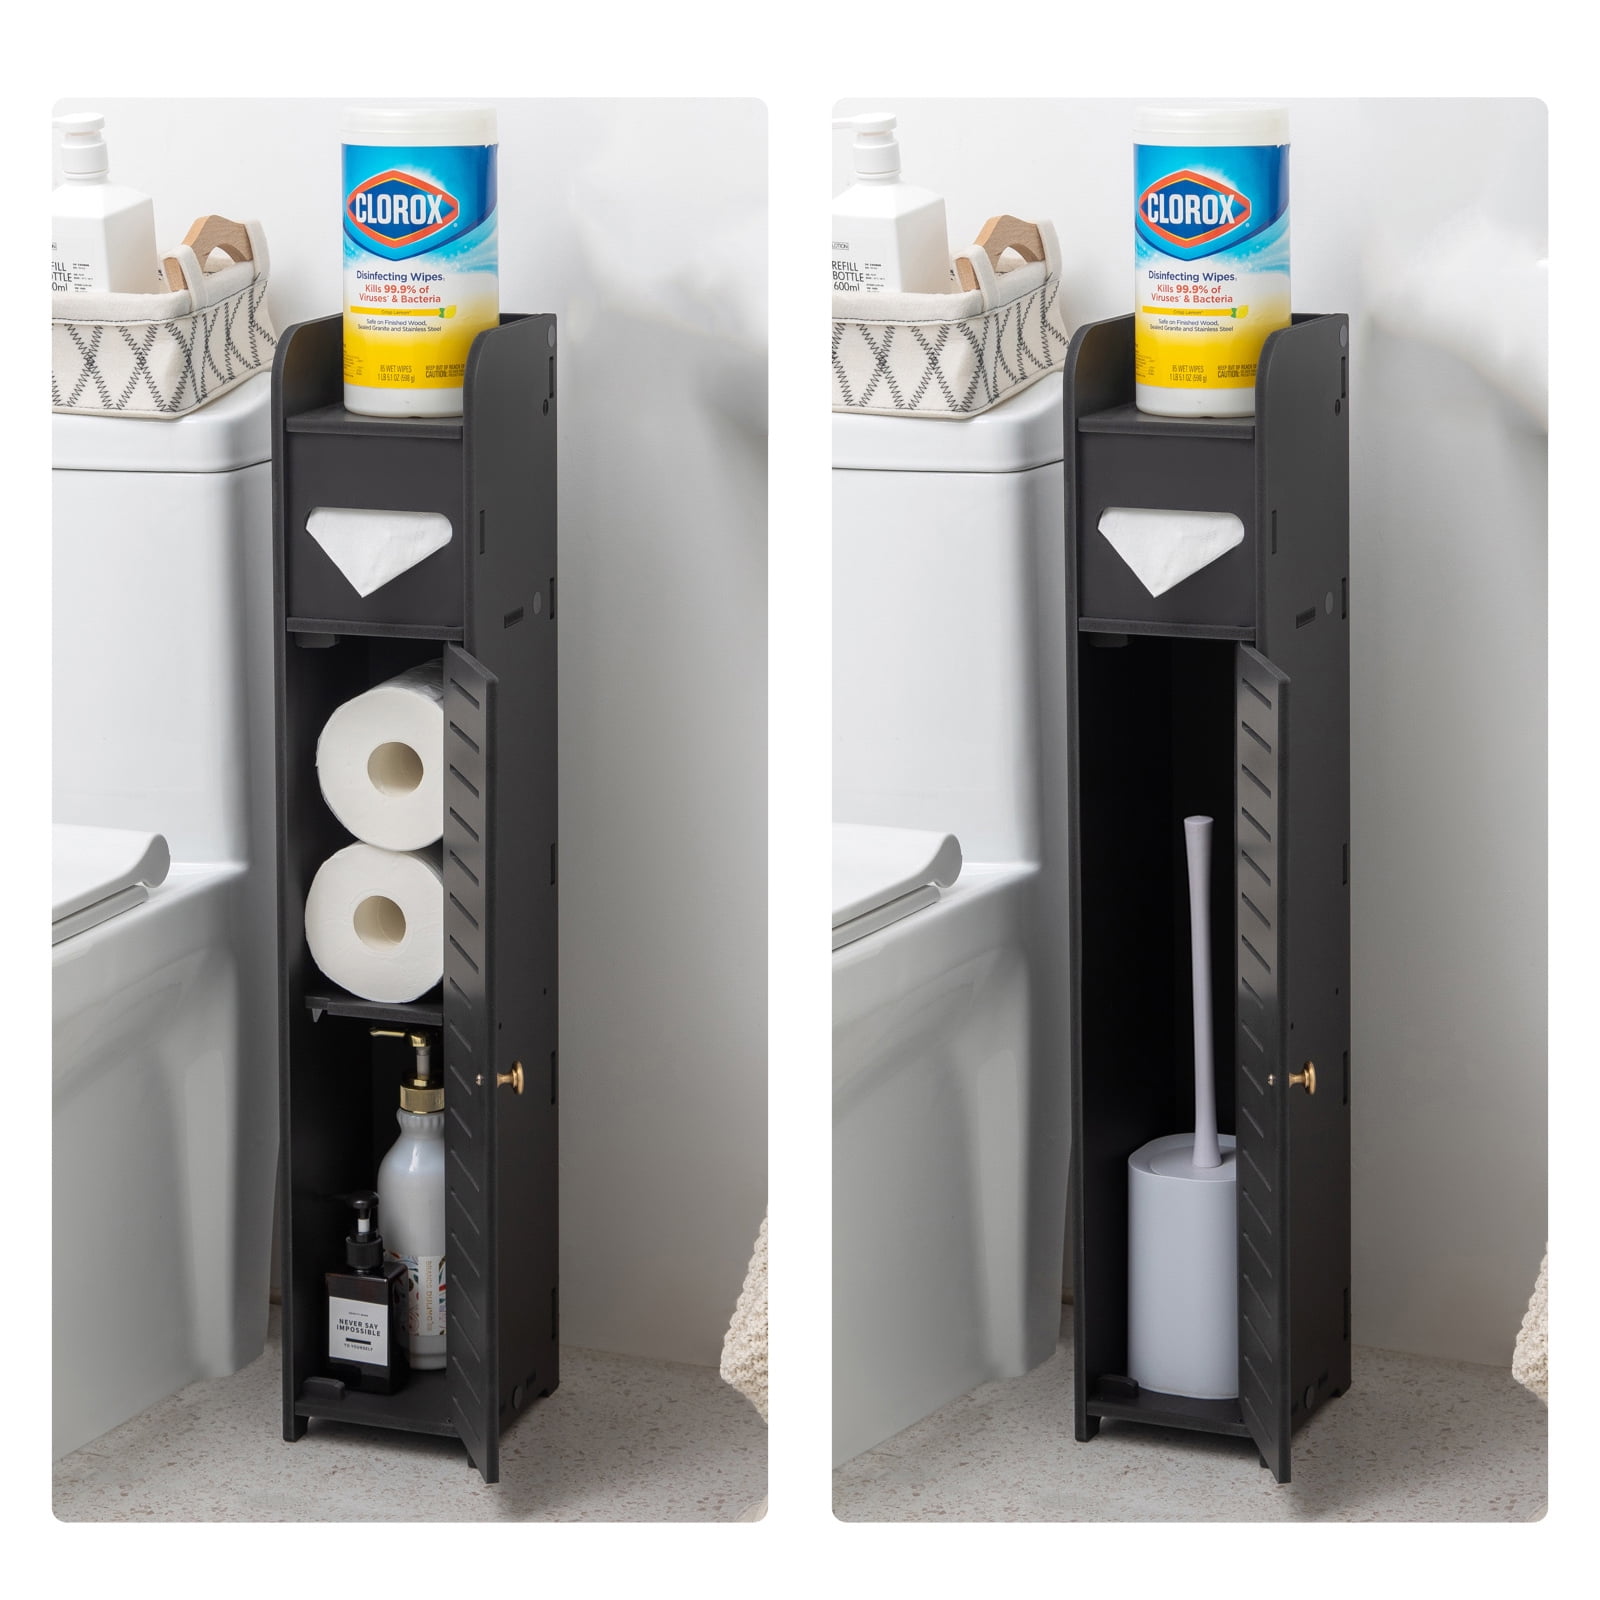 AOJEZOR: Small Bathroom Storage Cabinet Great for Toilet Paper